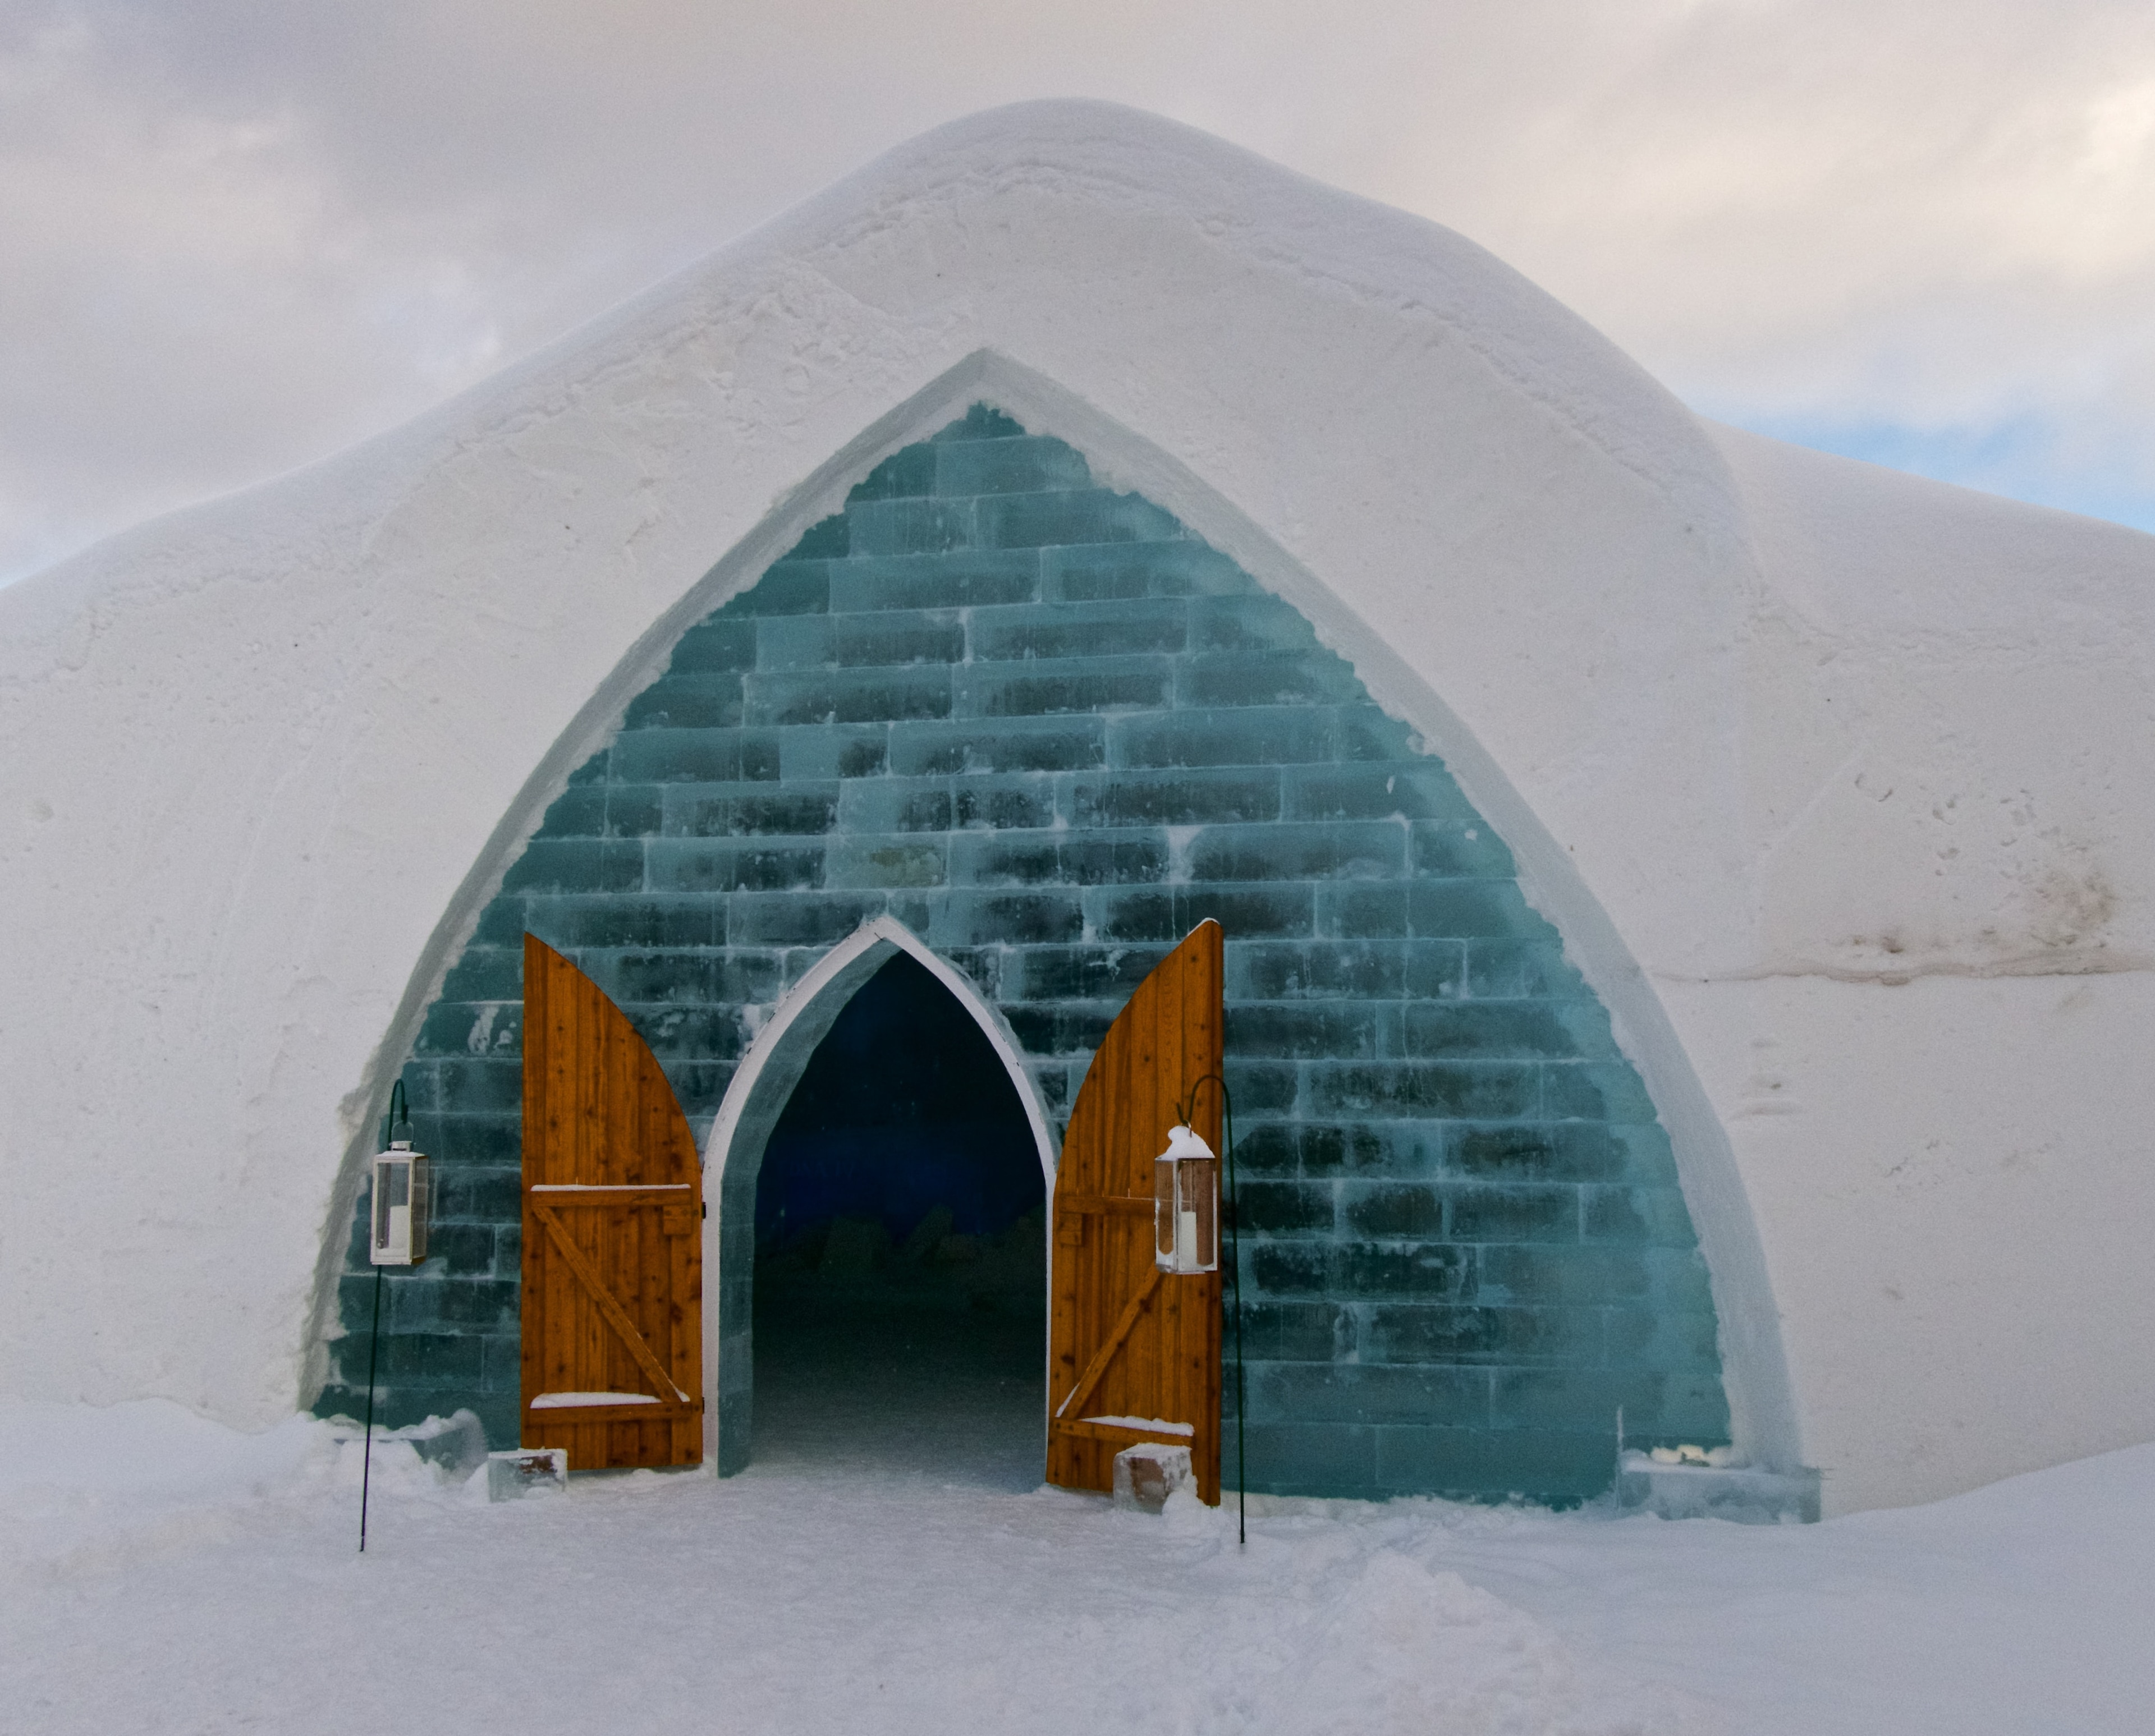 10 Most Popular Igloo Resorts to Experience the Northern Lights in Finland